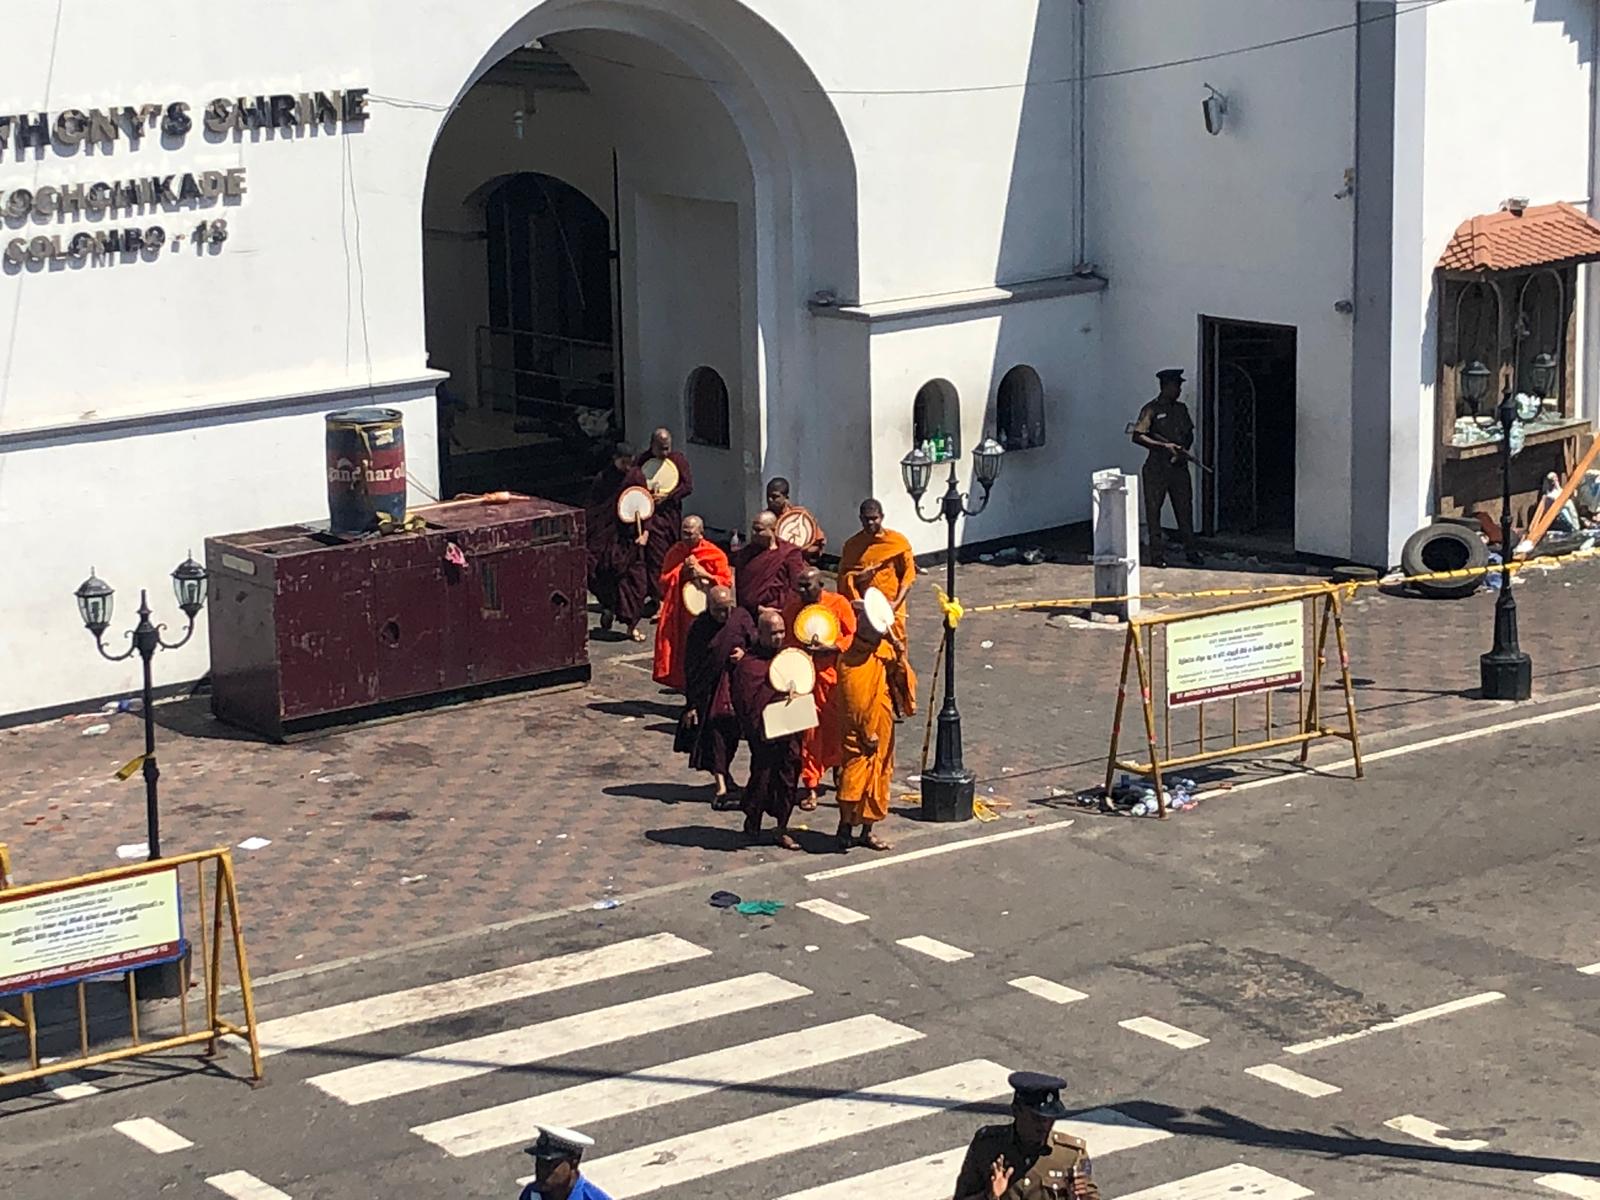 Buddhist monks arrive at St. Anthony's Shrine in Colombo, one of the sites attacked on Sunday.